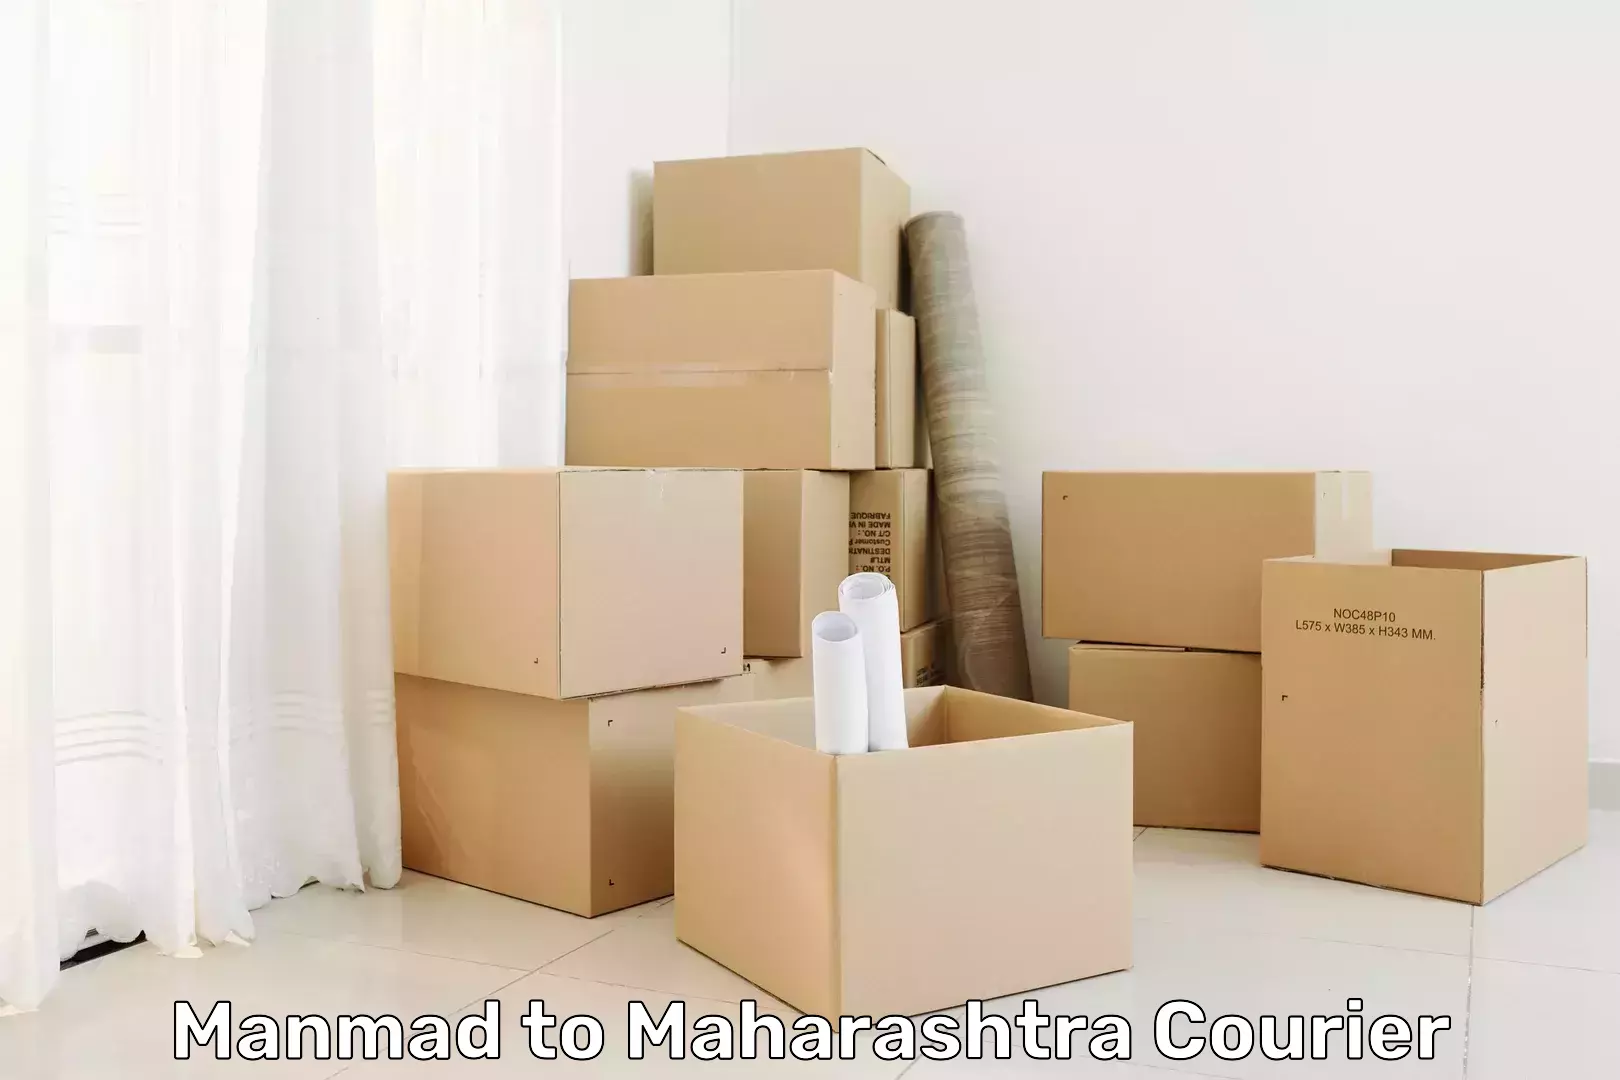 Same-day delivery options Manmad to Jalna